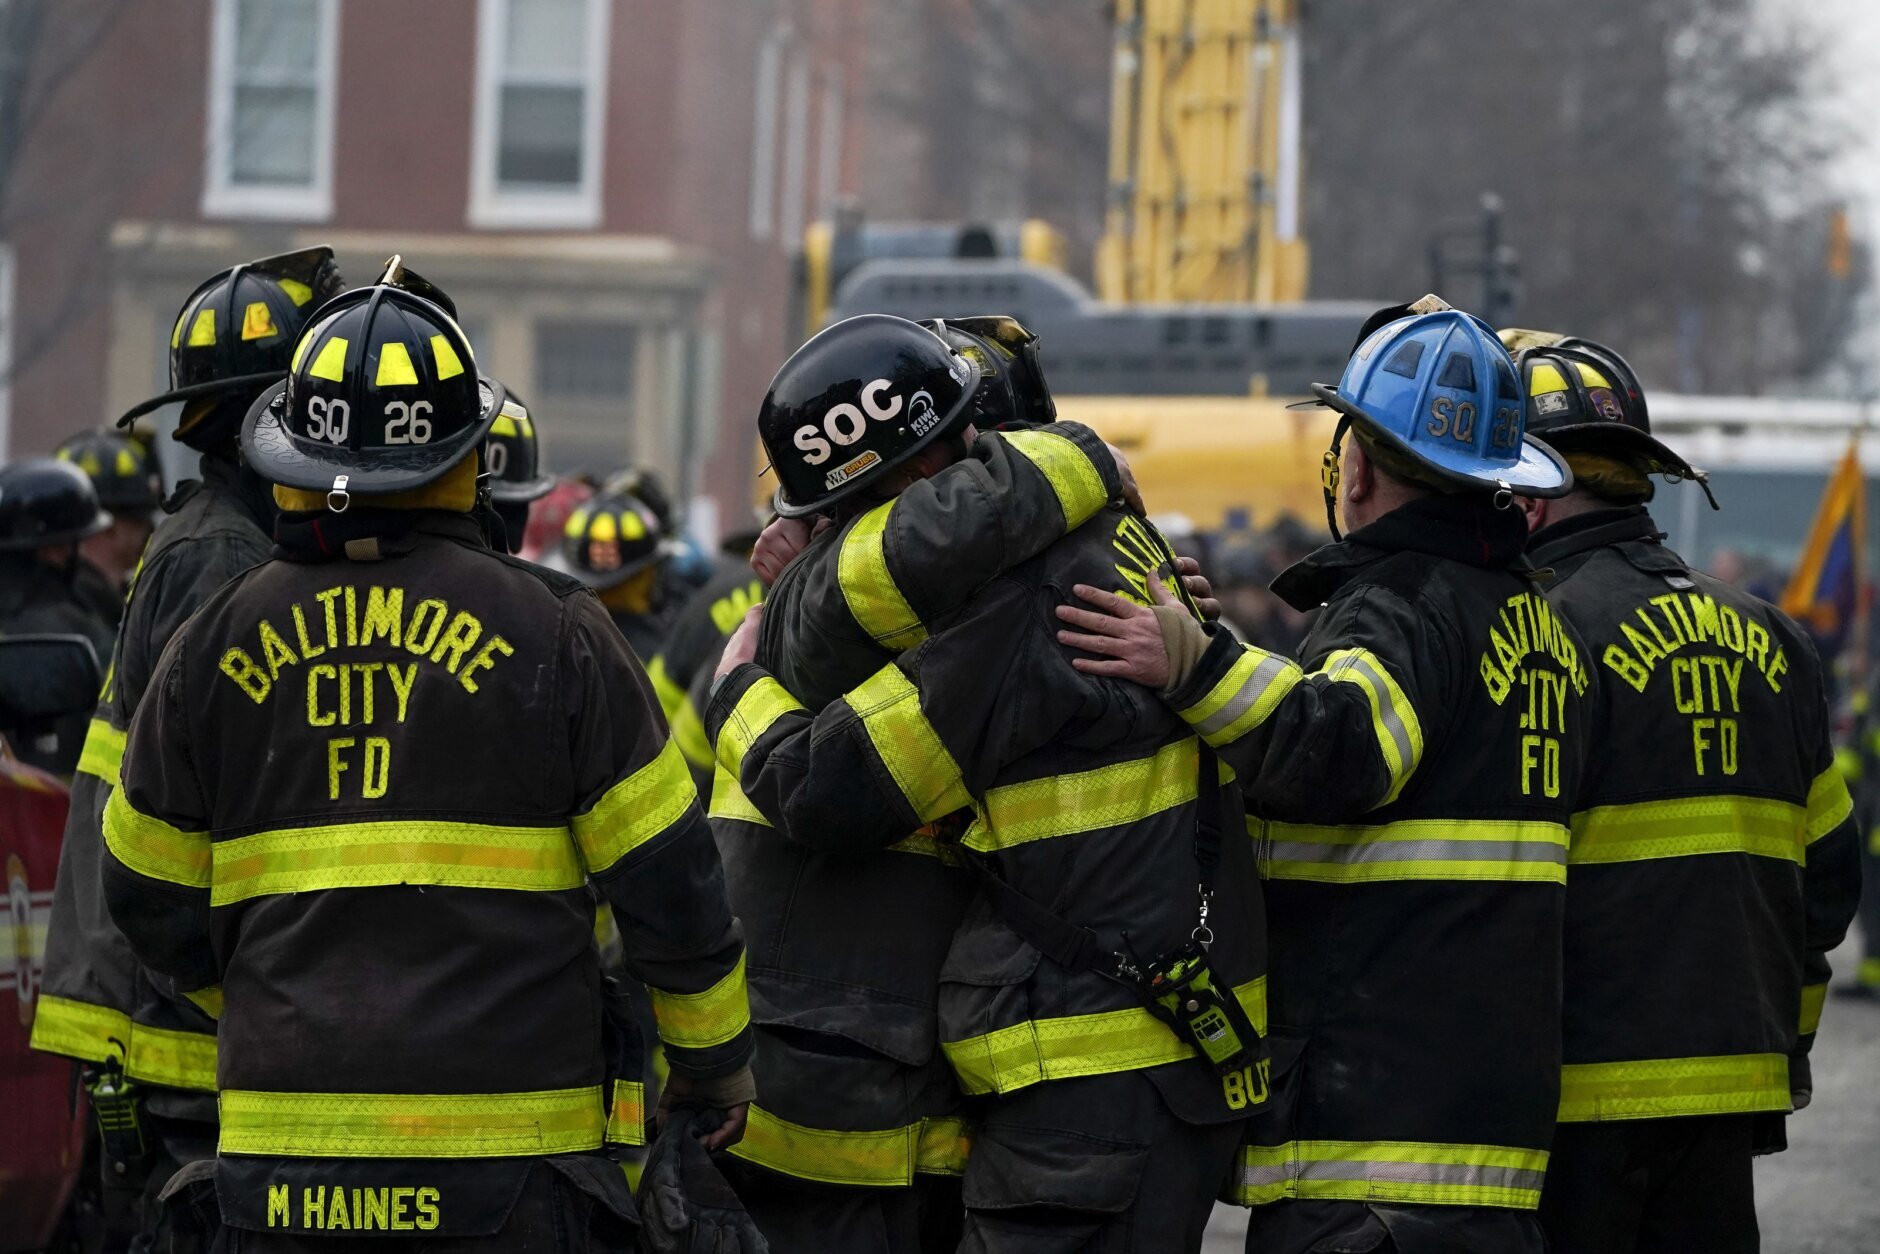 FILE - Firefighters embrace each other after a deceased firefighter was pulled out of a building collapse while battling a two-alarm fire in a vacant row home, Monday, Jan. 24, 2022, in Baltimore. Officials said several firefighters died during the blaze. The U.S. Census estimates there are 17 million vacant homes across the U.S. (AP Photo/Julio Cortez, File)